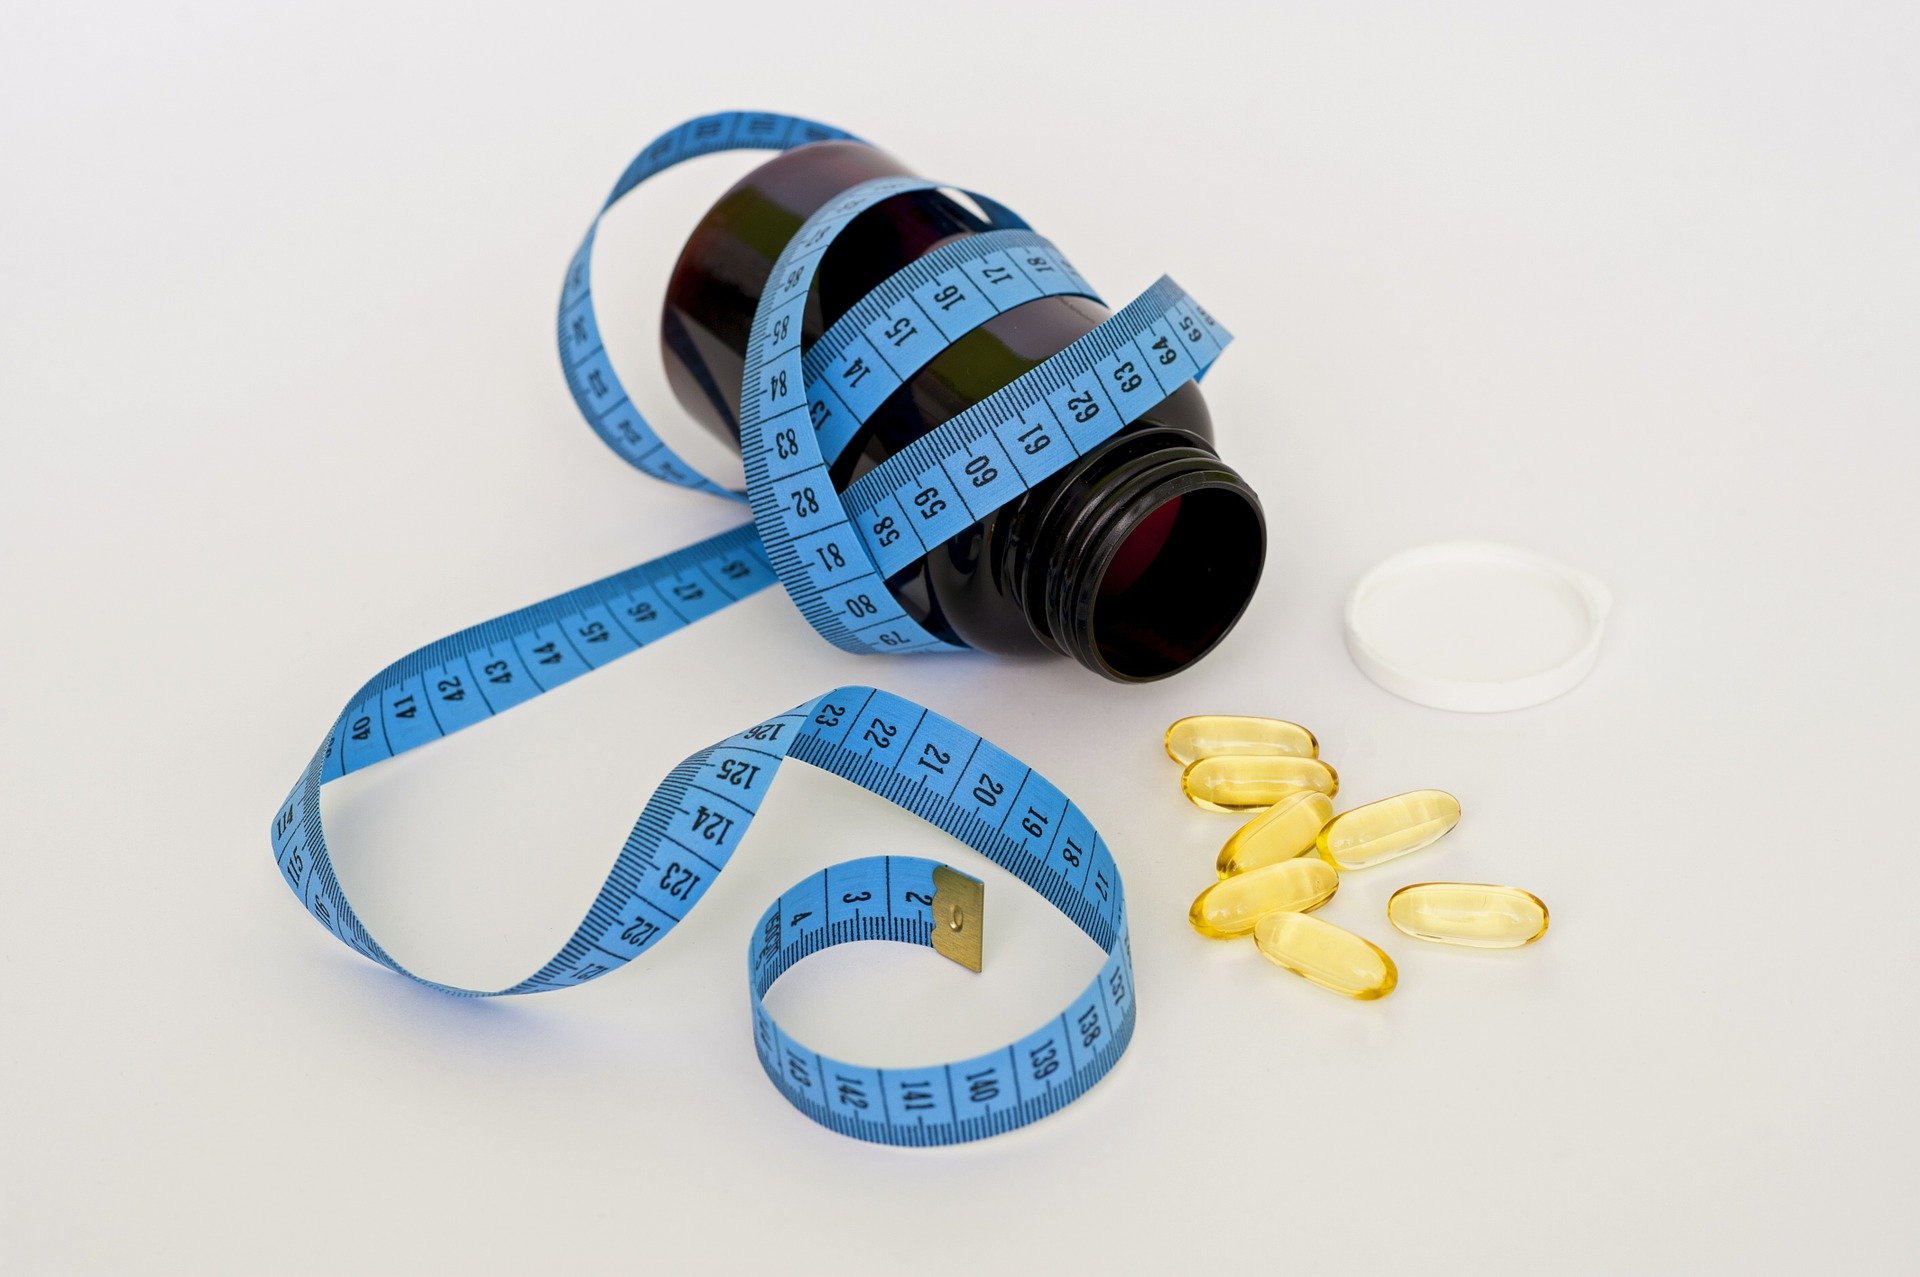 Rapid Weight Loss Myths. tablets. weight loss pills. supplements. www.blisslife.in